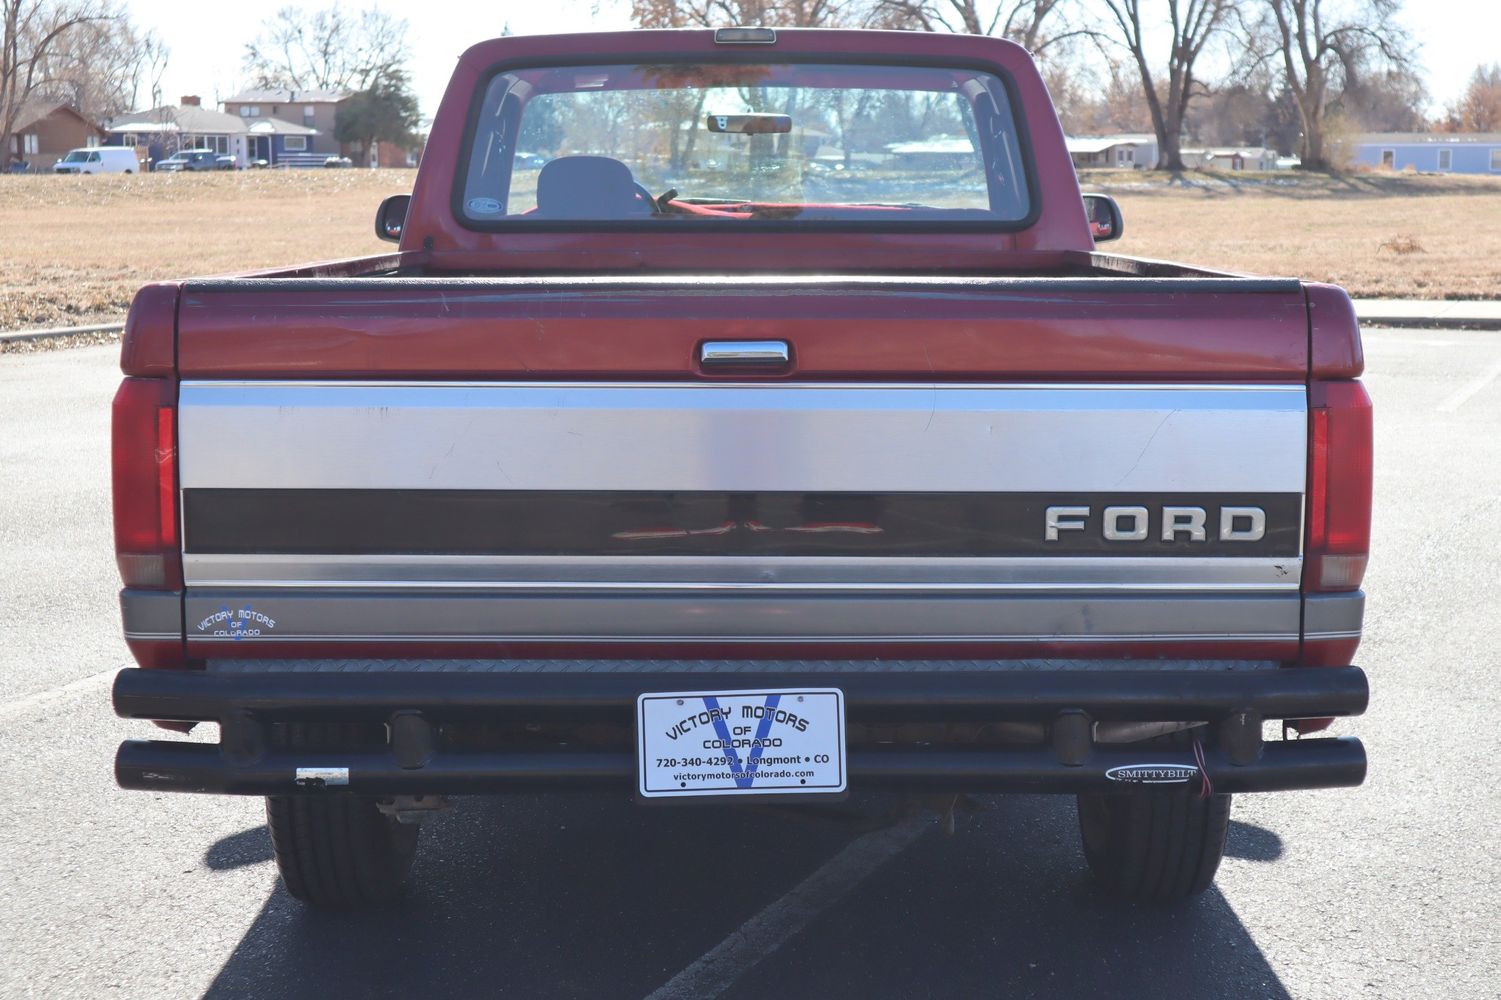 1992 Ford F-150 Base | Victory Motors of Colorado 1992 Ford F150 4.9 Towing Capacity